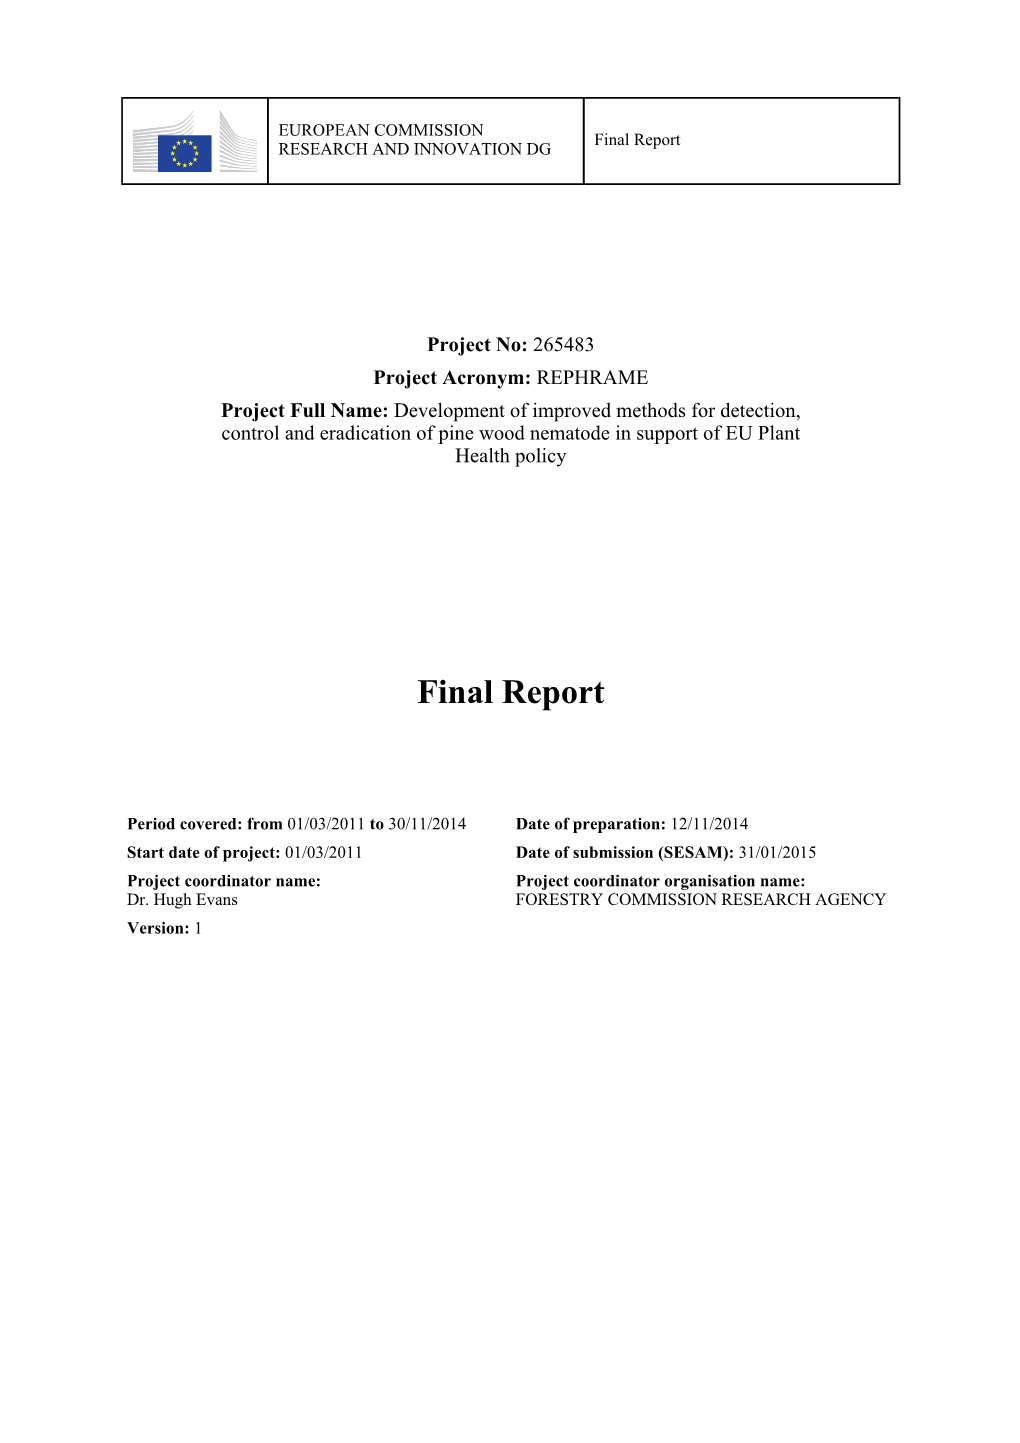 REPHRAME Project Final Report